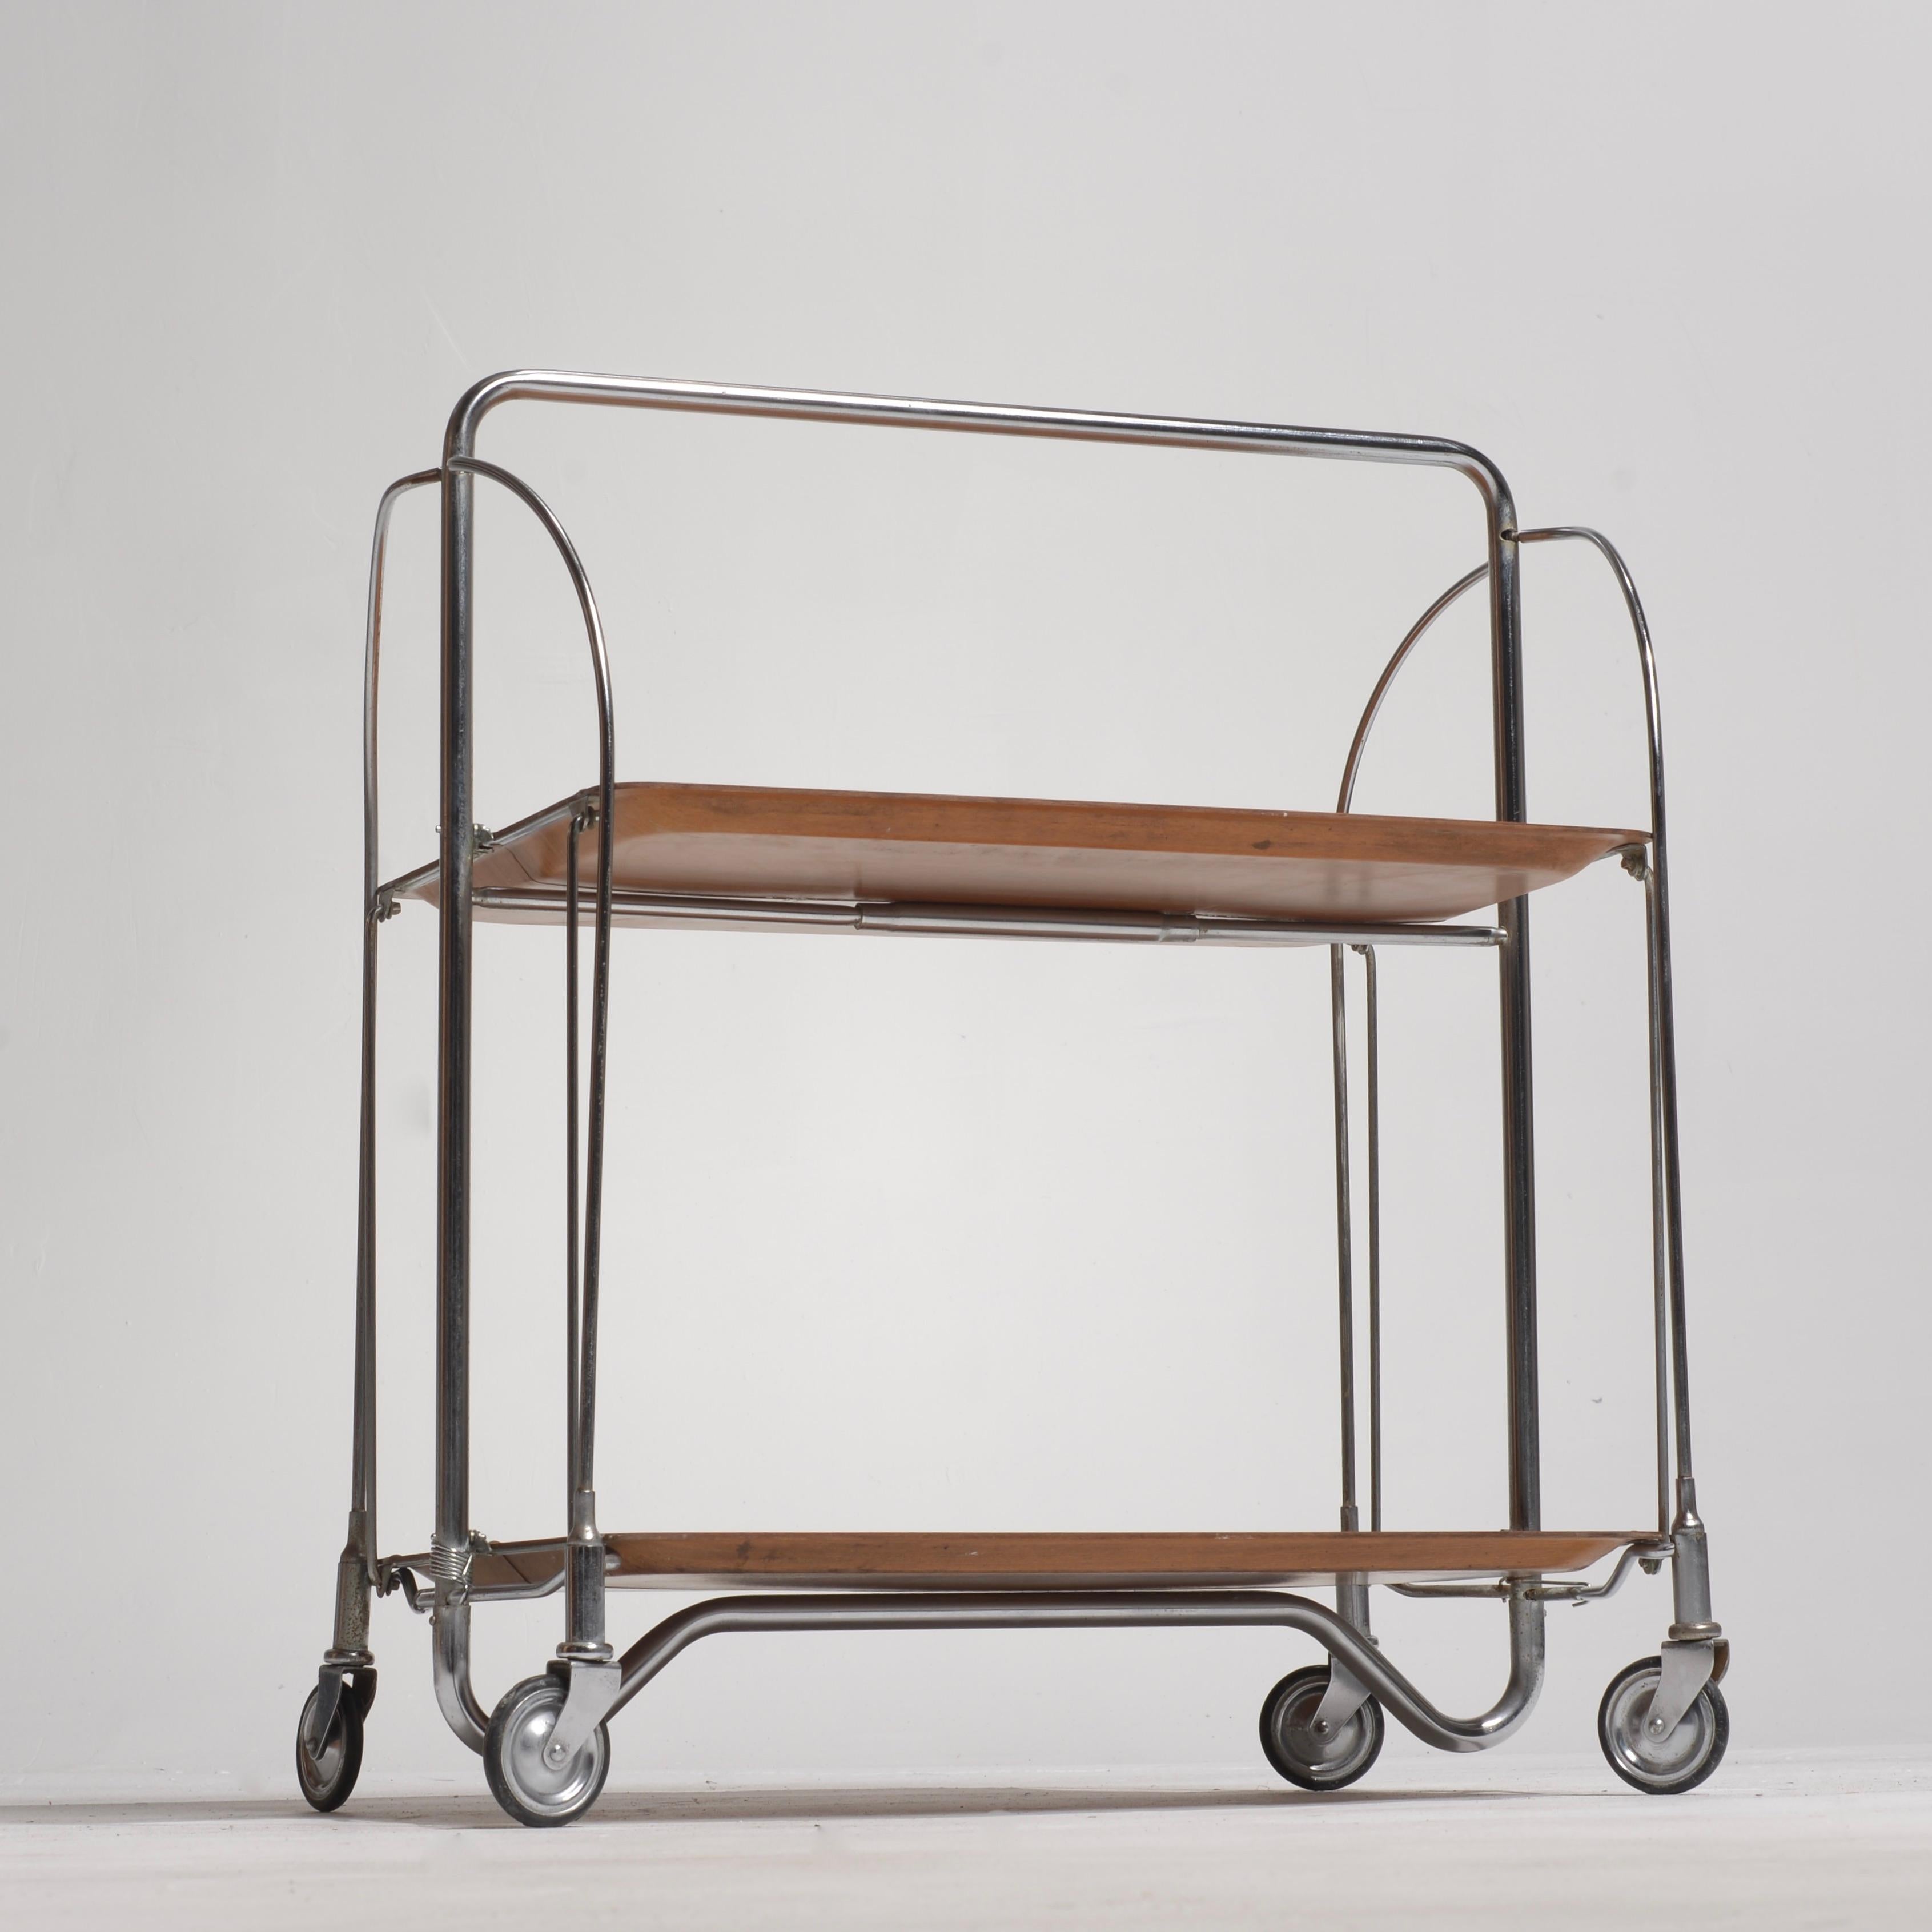 Vintage west German mid-century foldable serving trolley. Bakelite tops with metal frame. Very good condition. 1950-1975